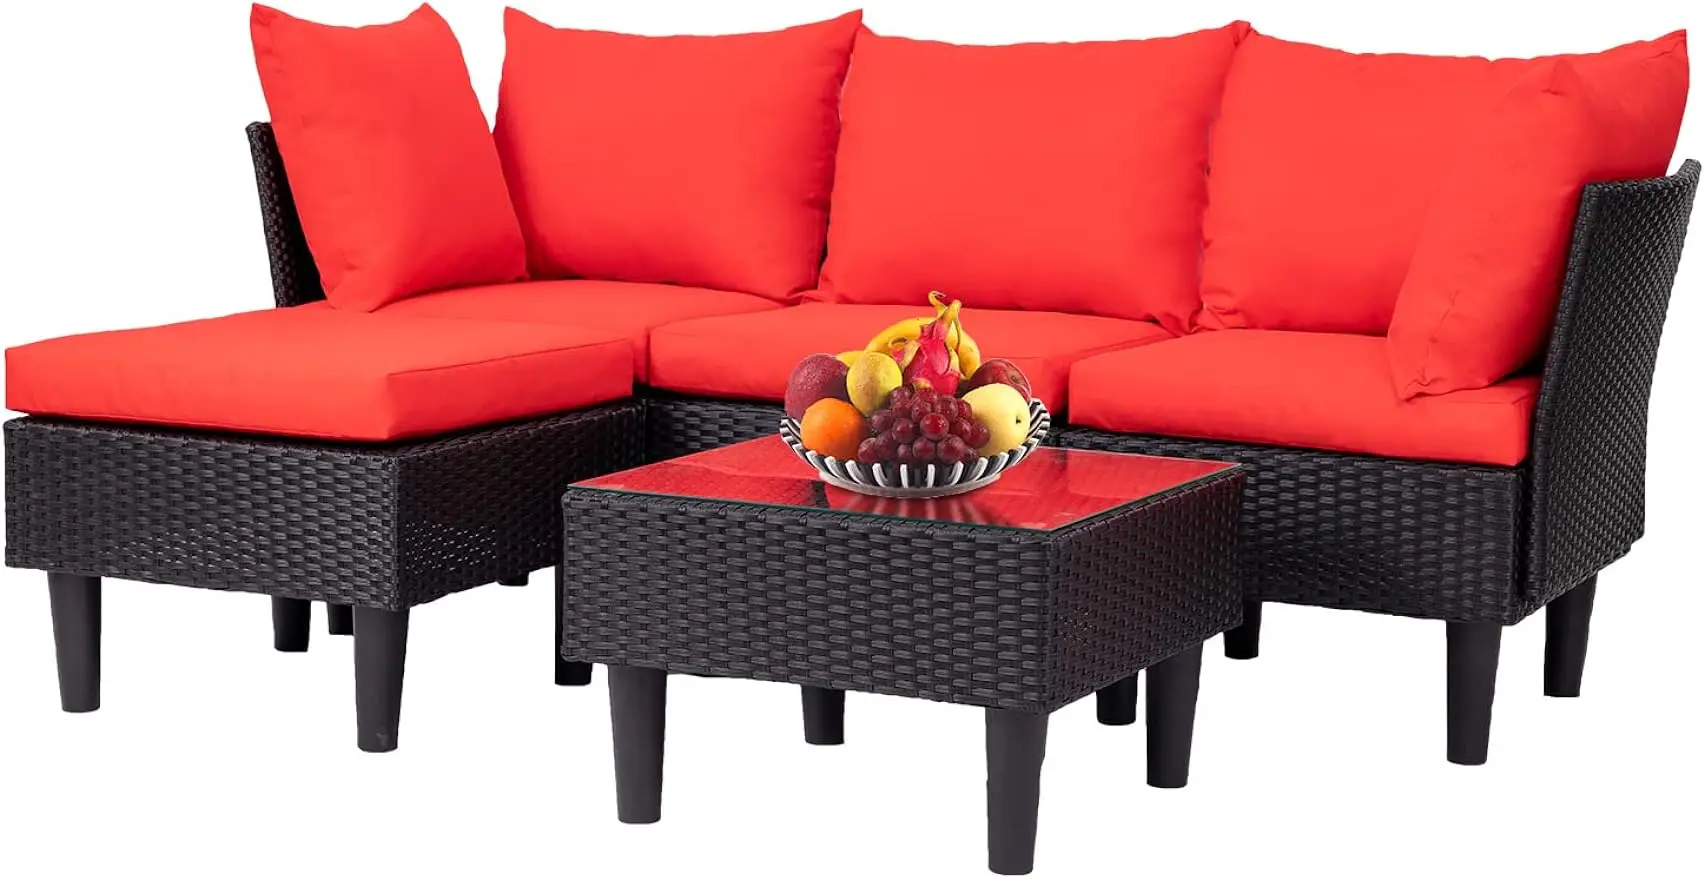 

FDW Patio Furniture Set 5 Pieces Outdoor Wicker Conversation Set Sectional Sofa Rattan Chair for Outdoor Backyard Porch Poolside